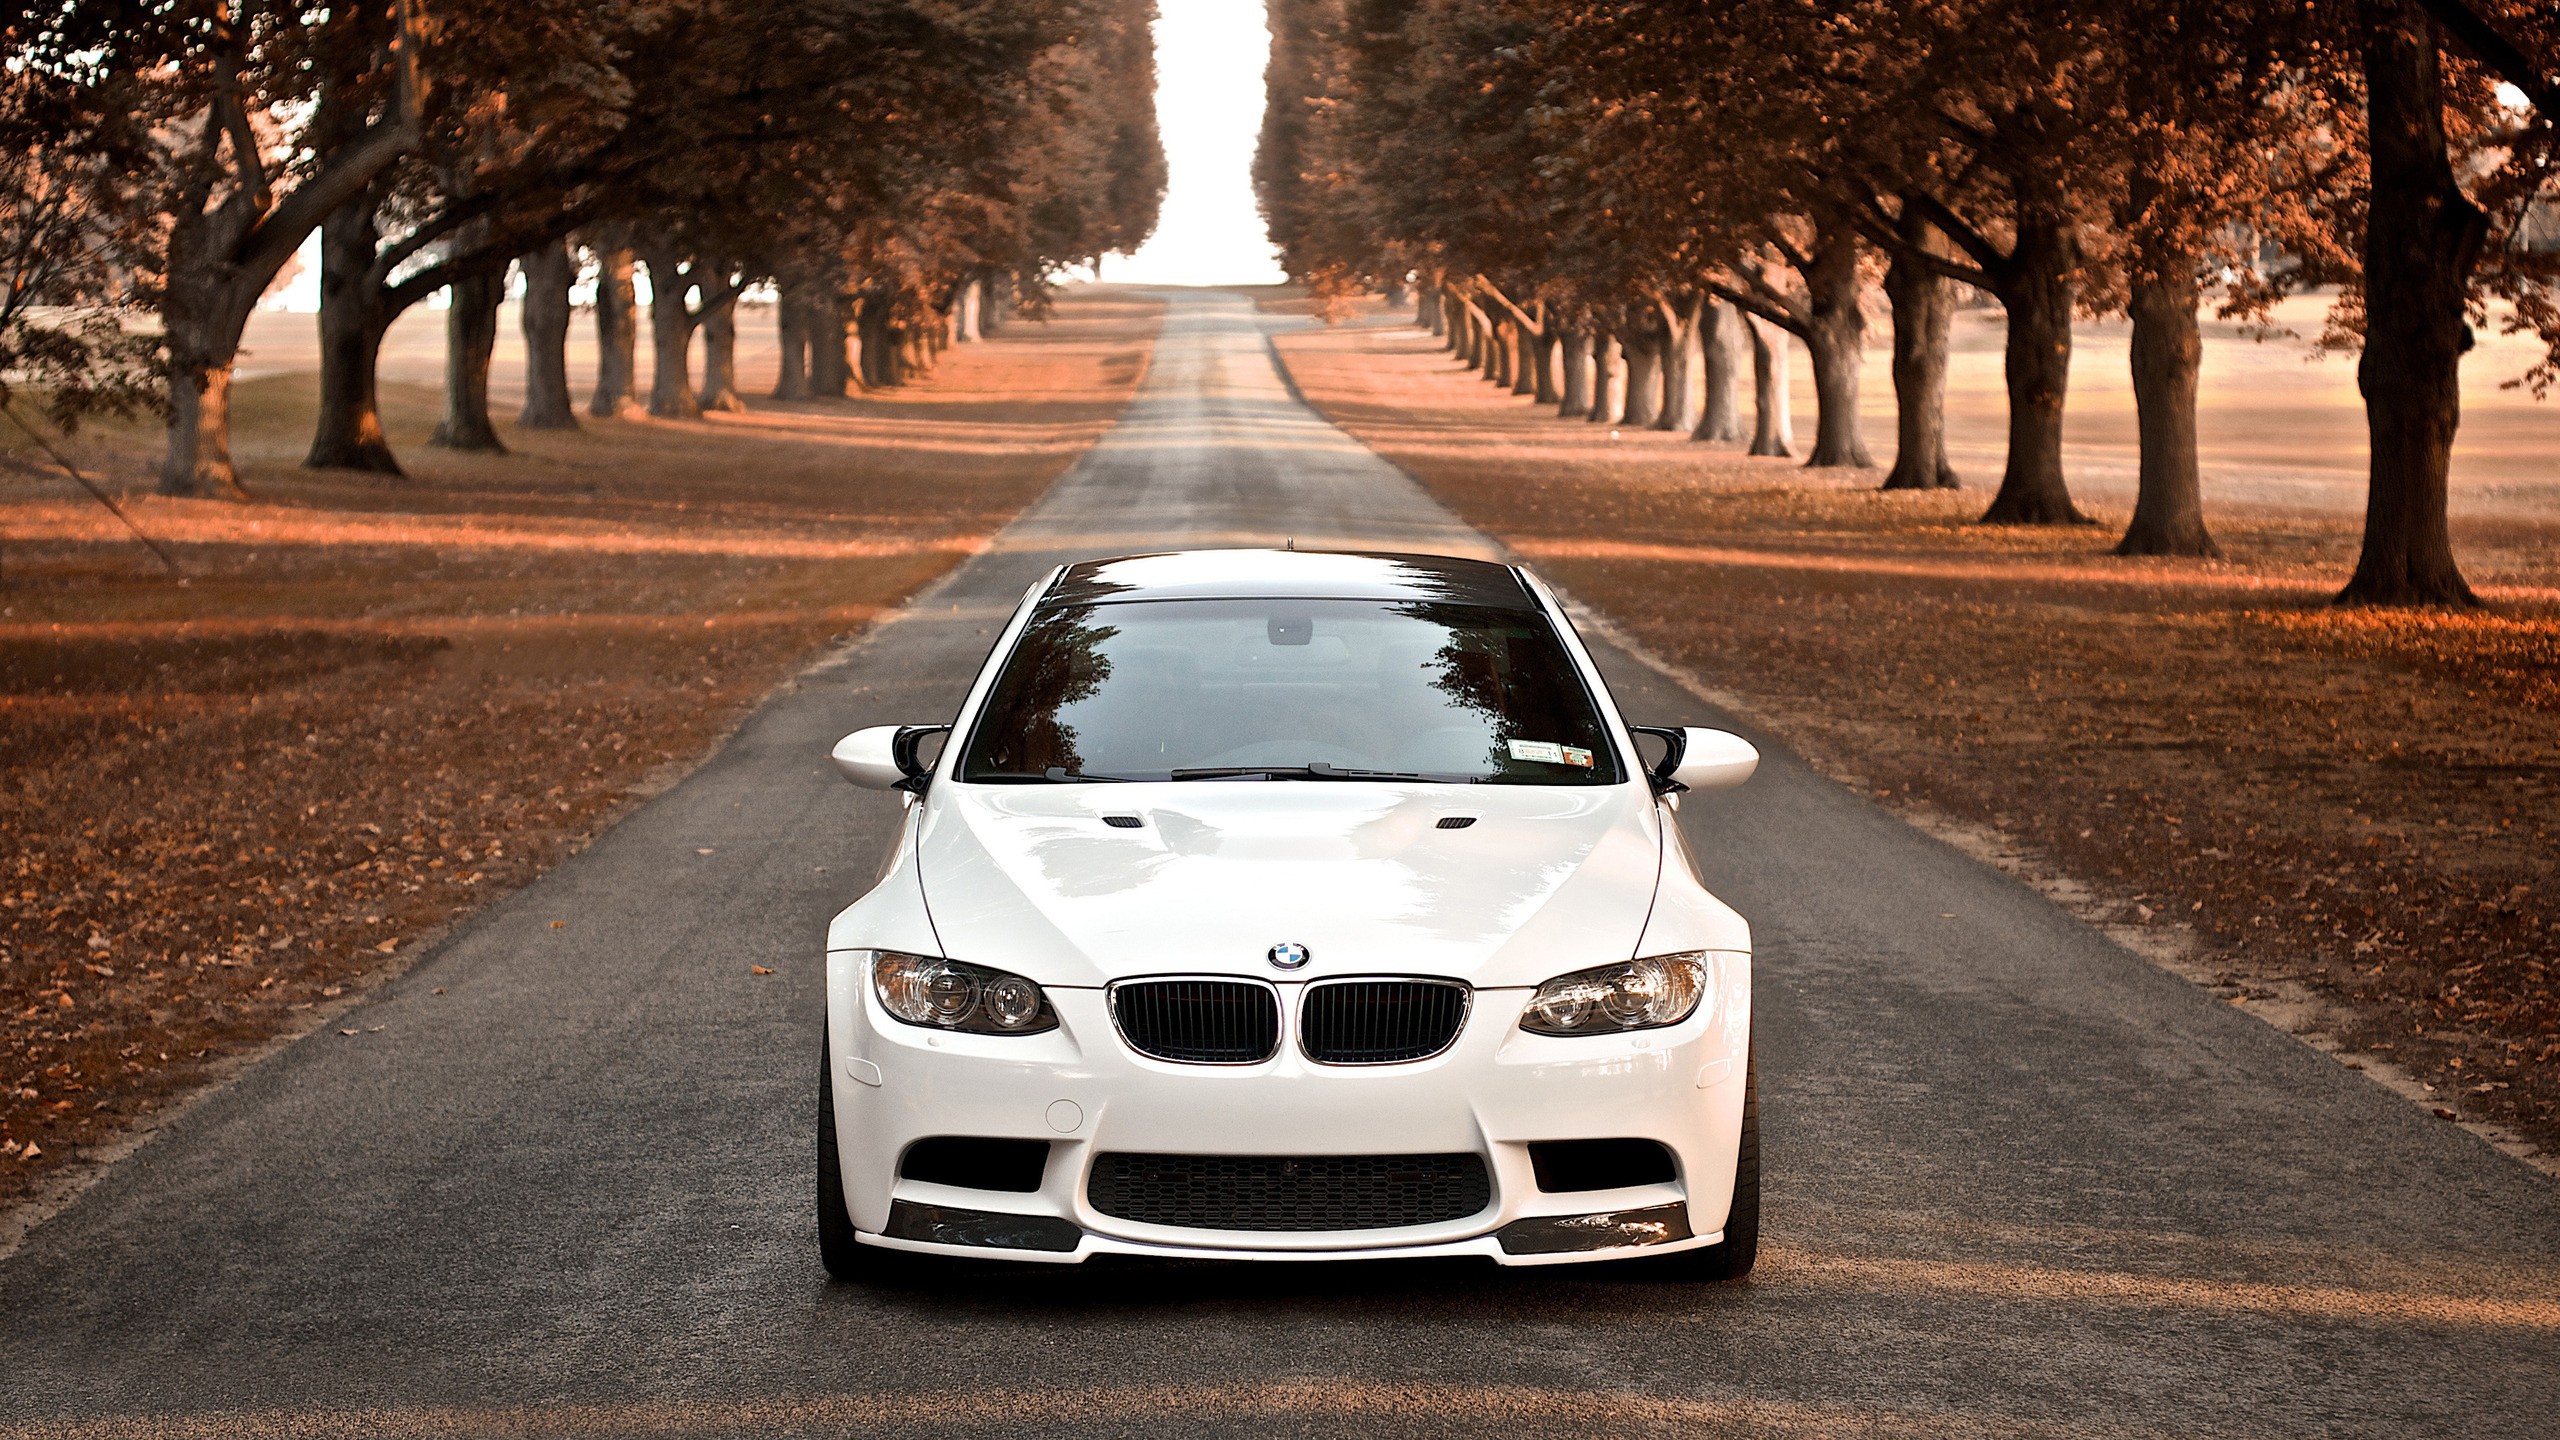 Wallpapers Bmw Hd